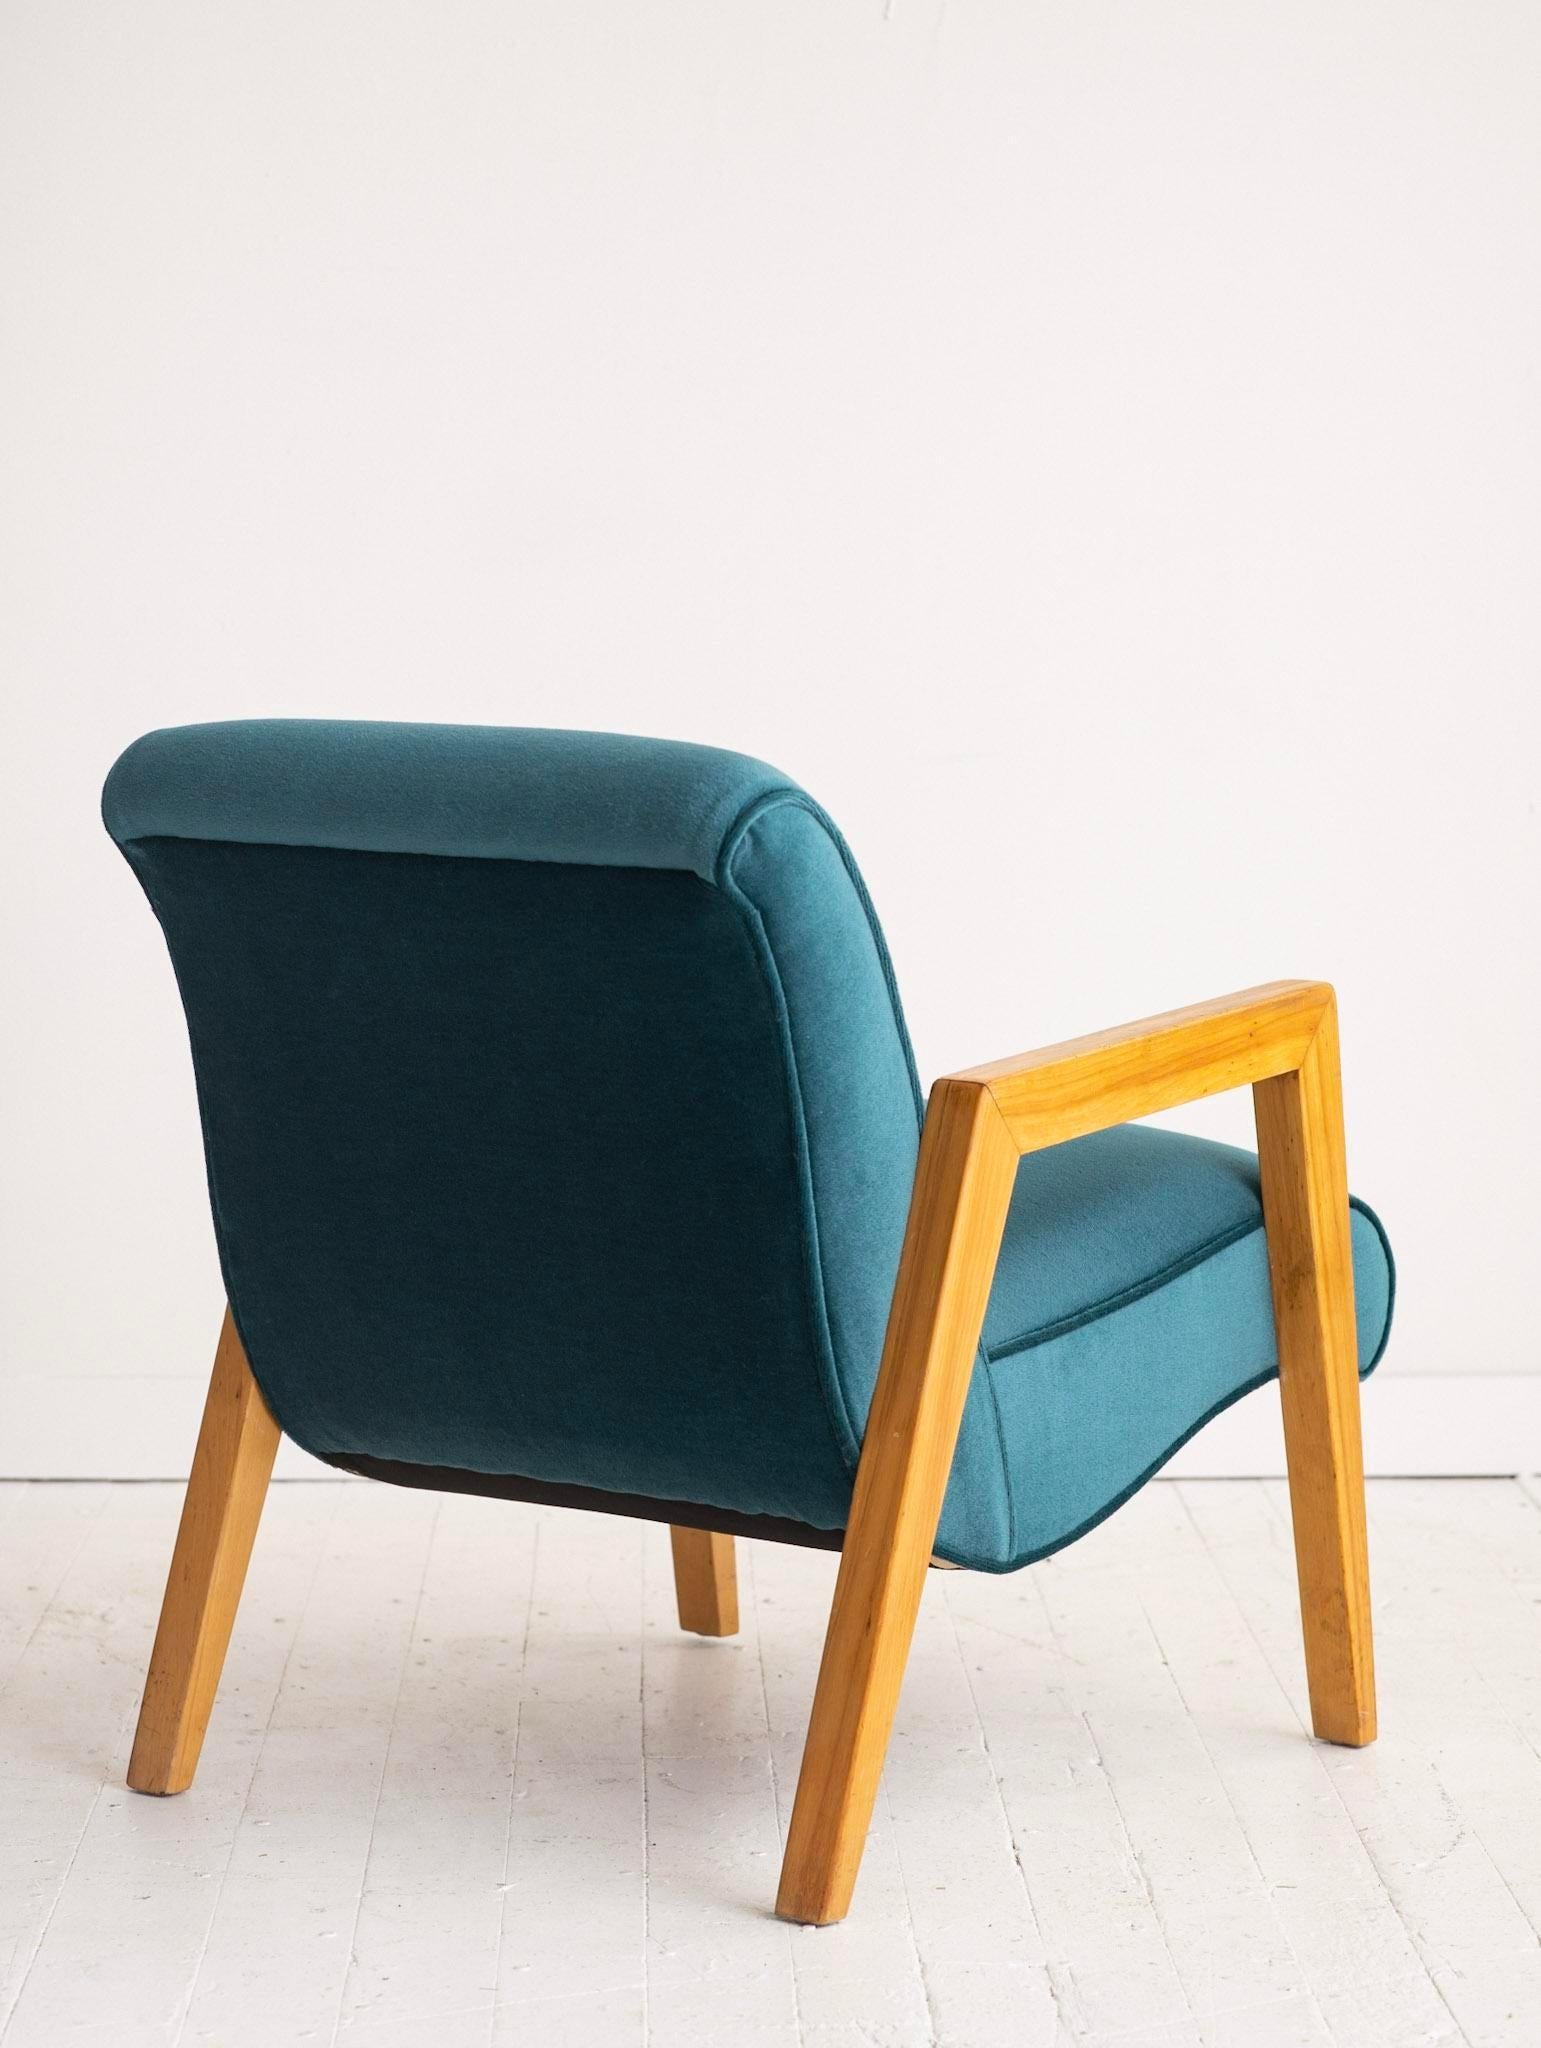 American Scoop Chair by Leslie Diamond for Conant Ball in Teal Mohair